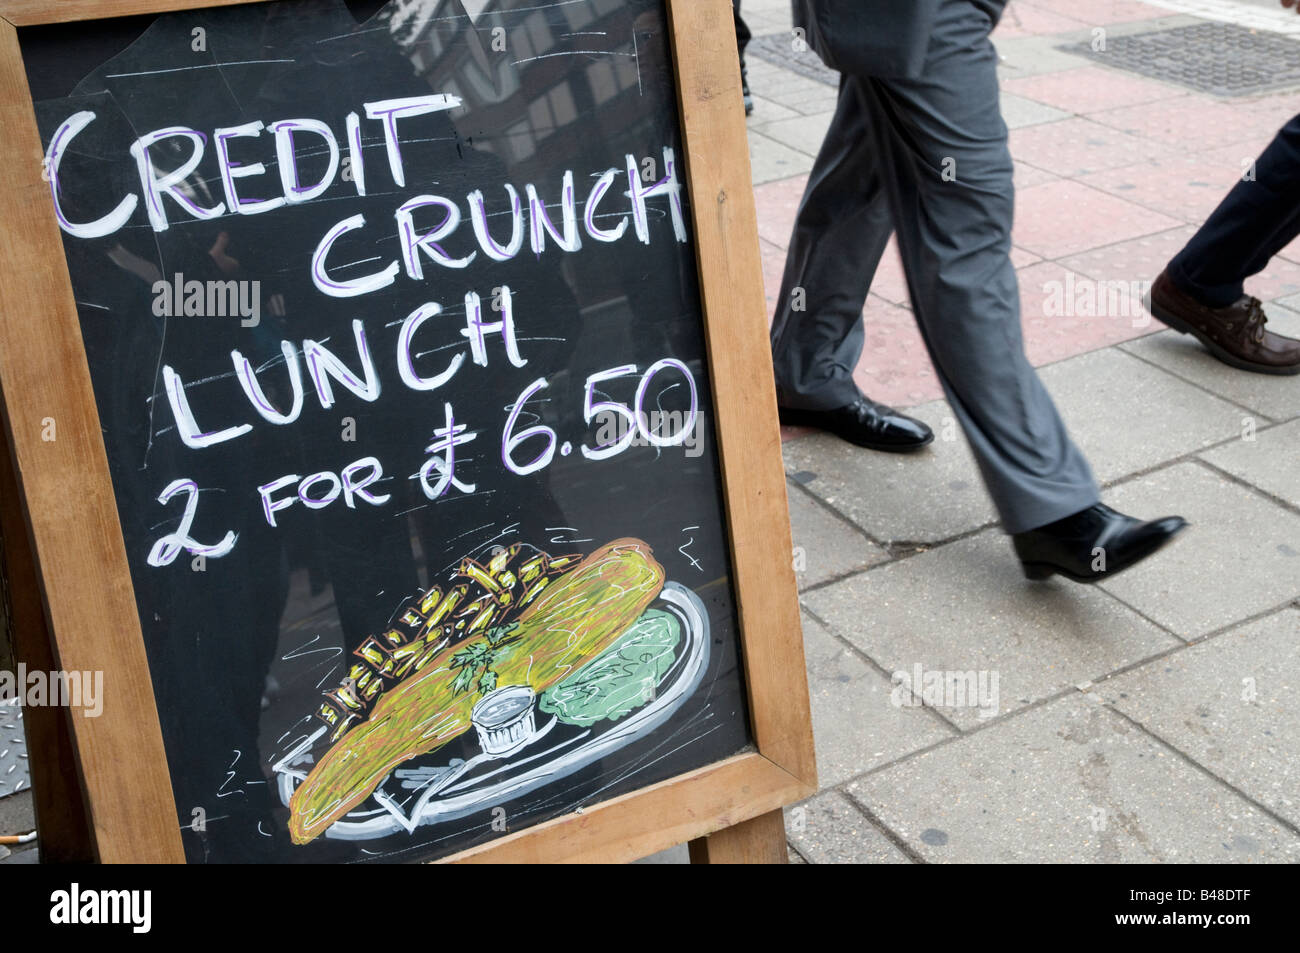 Pub lunch sign CREDIT CRUNCH LUNCH, England UK Stock Photo